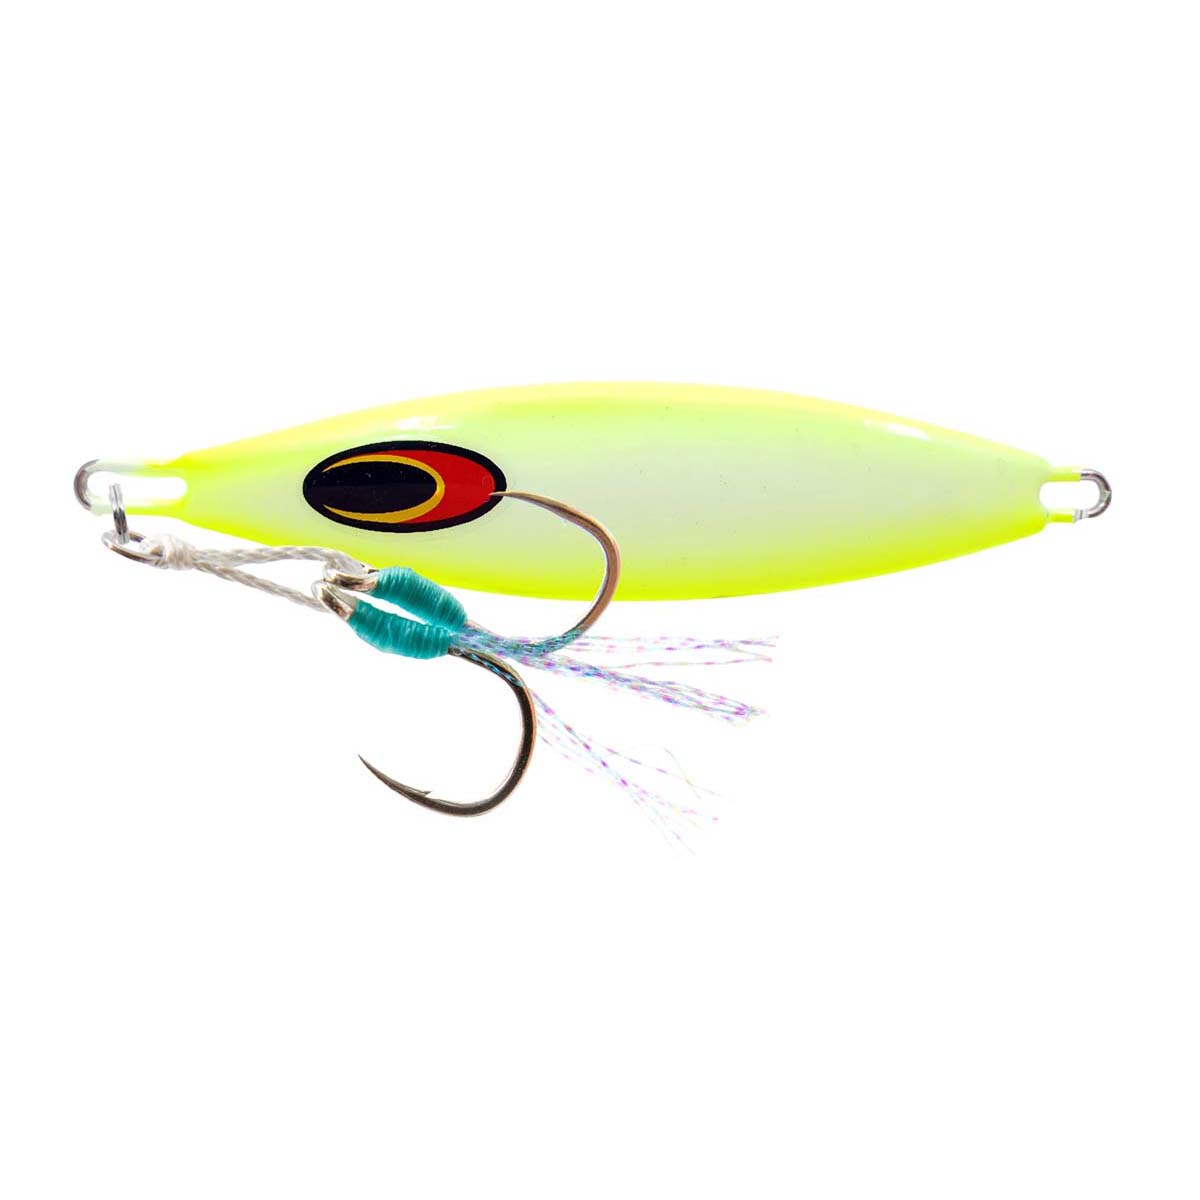 Nomad Buffalo Jig Lure 40g Chartreuse White Glow @ Club BCF